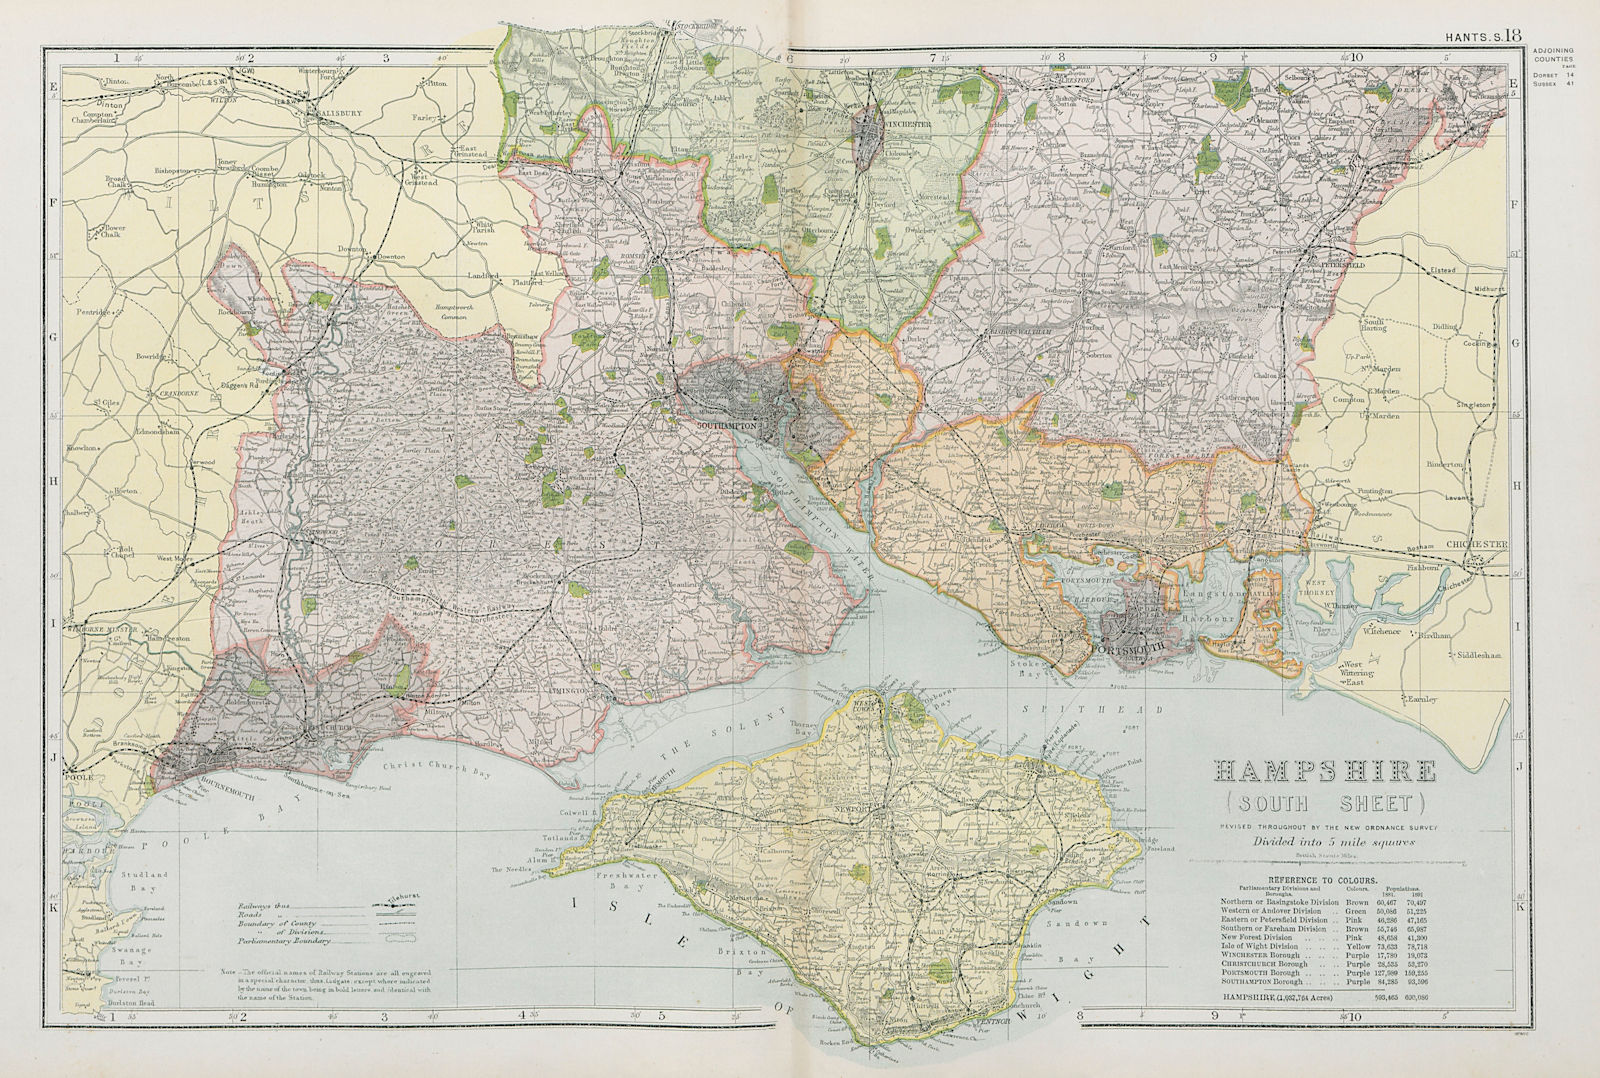 HAMPSHIRE SOUTH & ISLE OF WIGHT. Parliamentary divisions & parks. BACON 1900 map